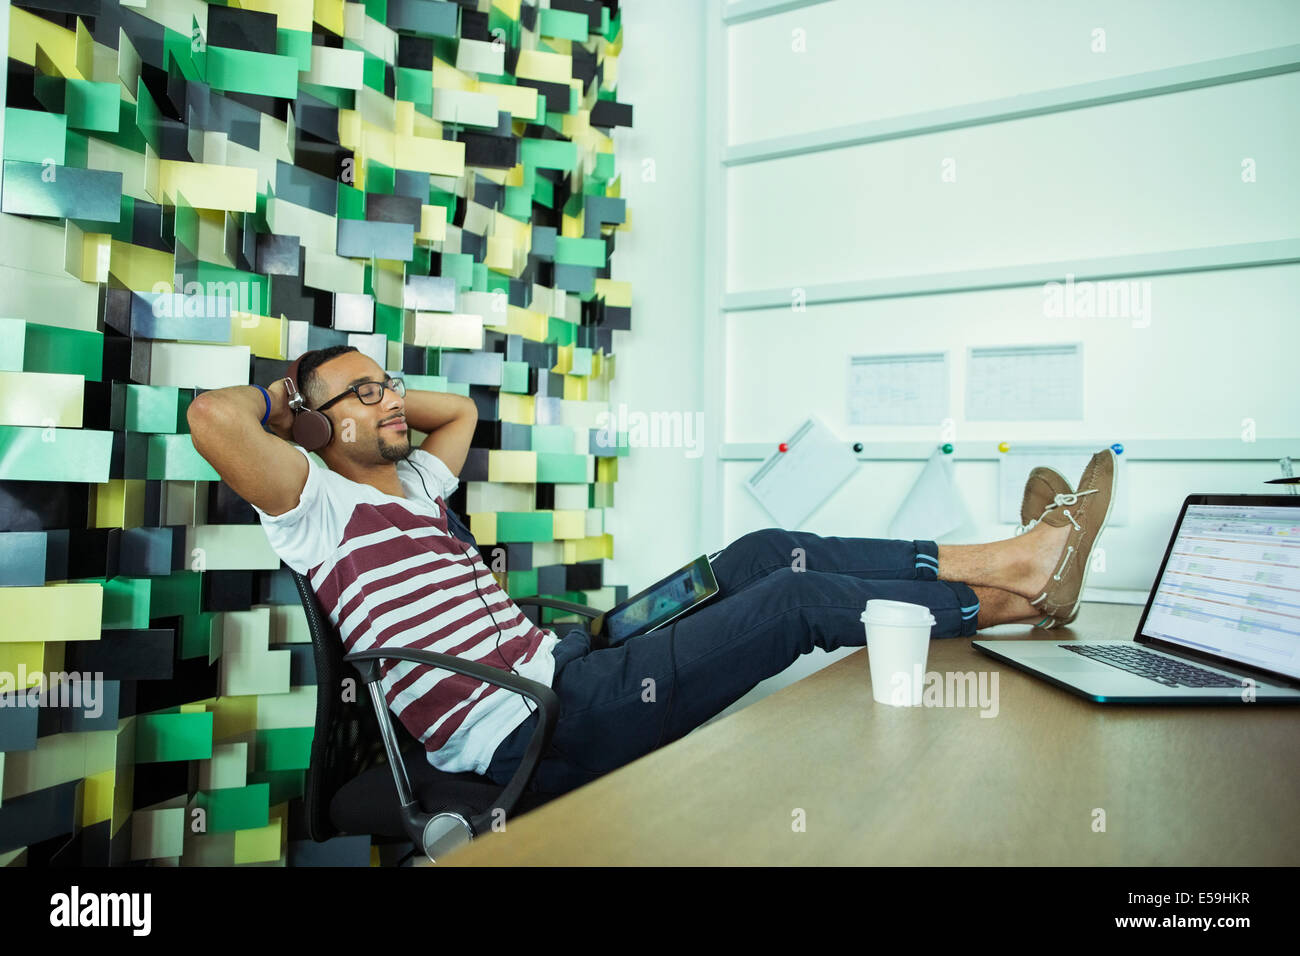 Man relaxing at desk in office Banque D'Images